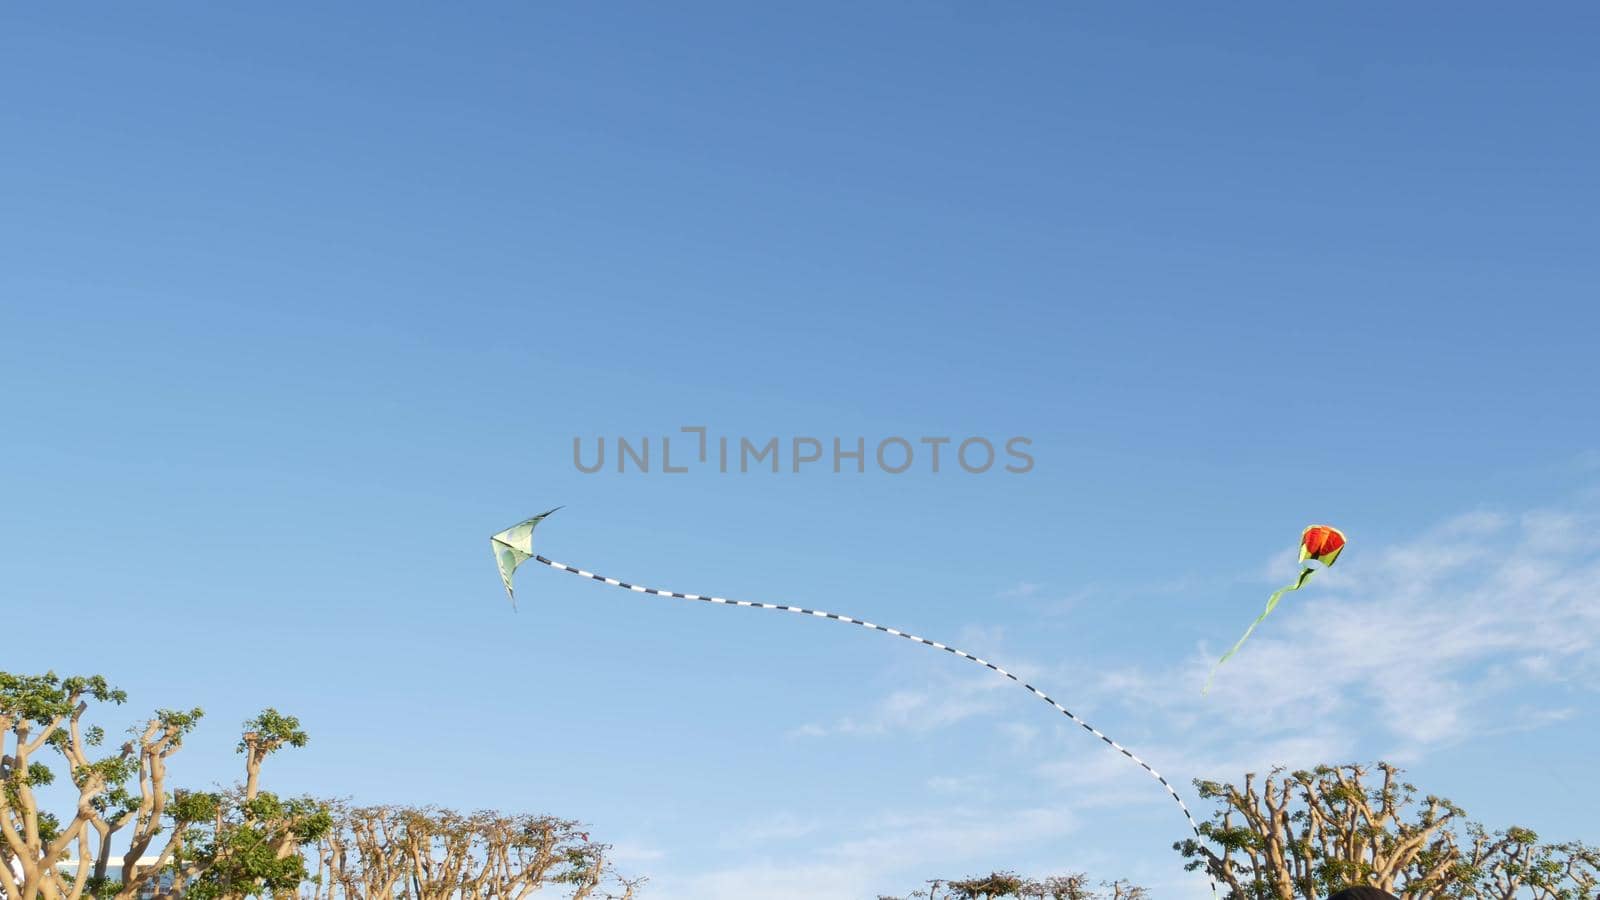 Colorful kite flying in blue sky over trees in Embarcadero Marina park, San Diego, California USA. Kids multi colored toy gliding mid-air in wind. Symbol of childhood, summertime and leisure activity by DogoraSun